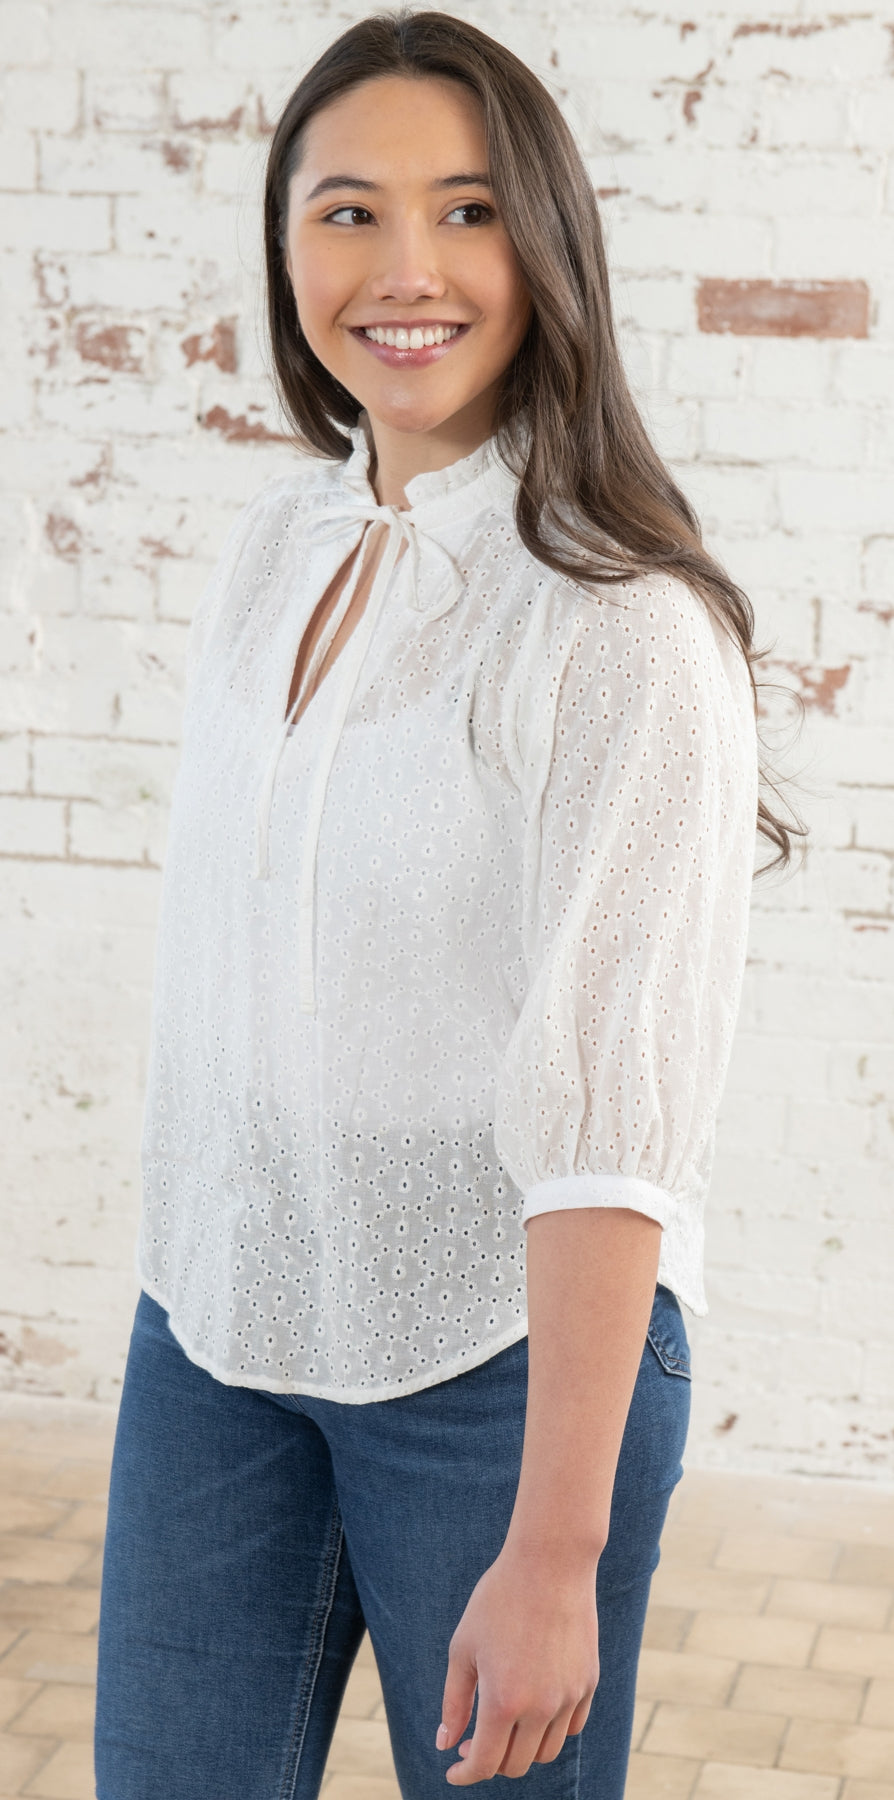 Women's white broderie anglaise blouse from Lighthouse.